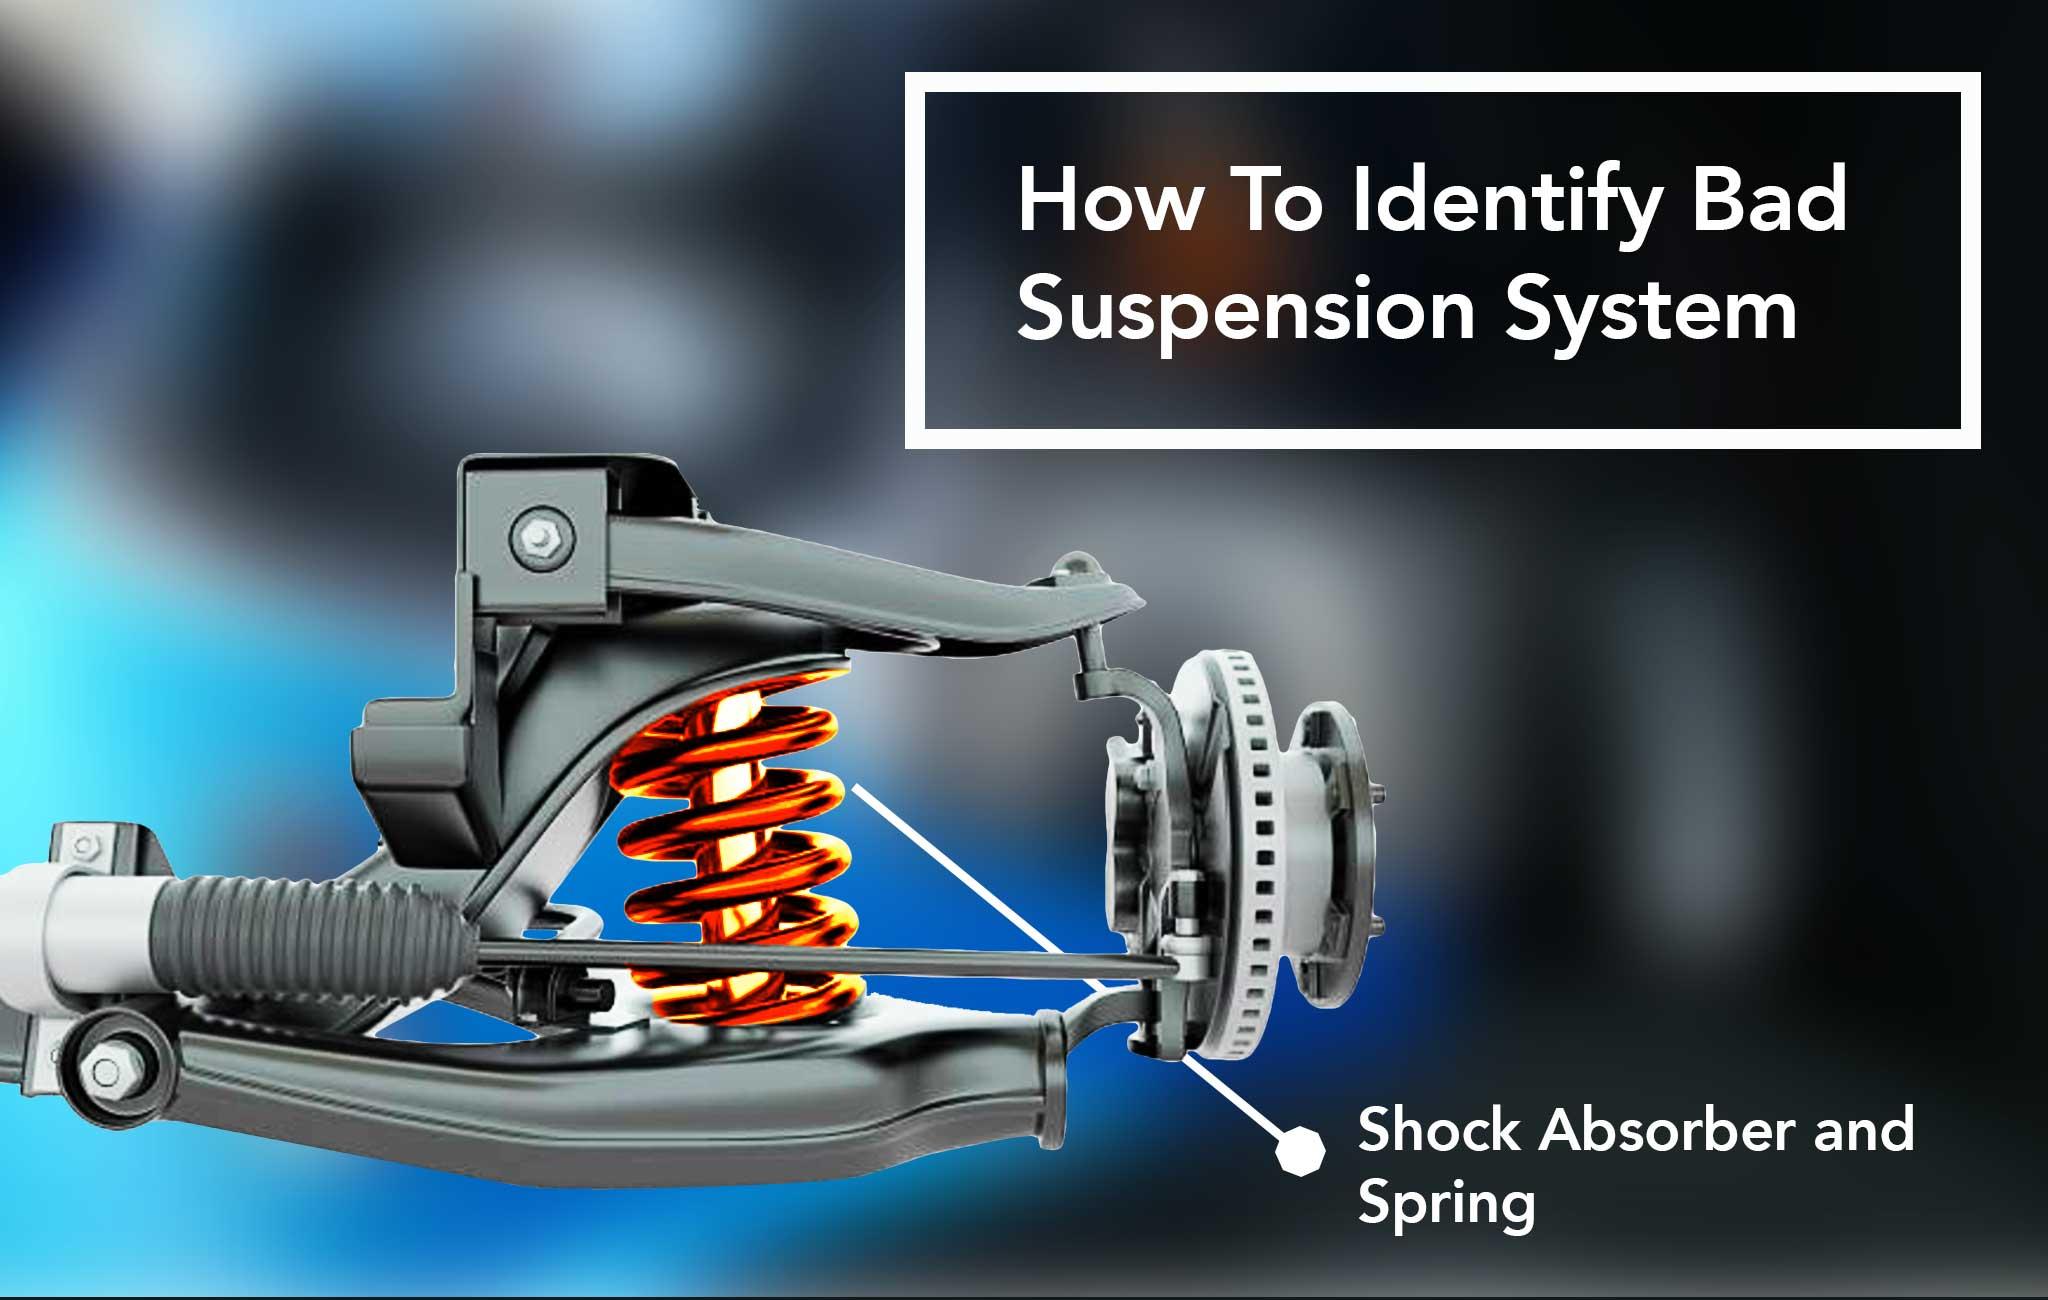 Shock Absorber and Spring